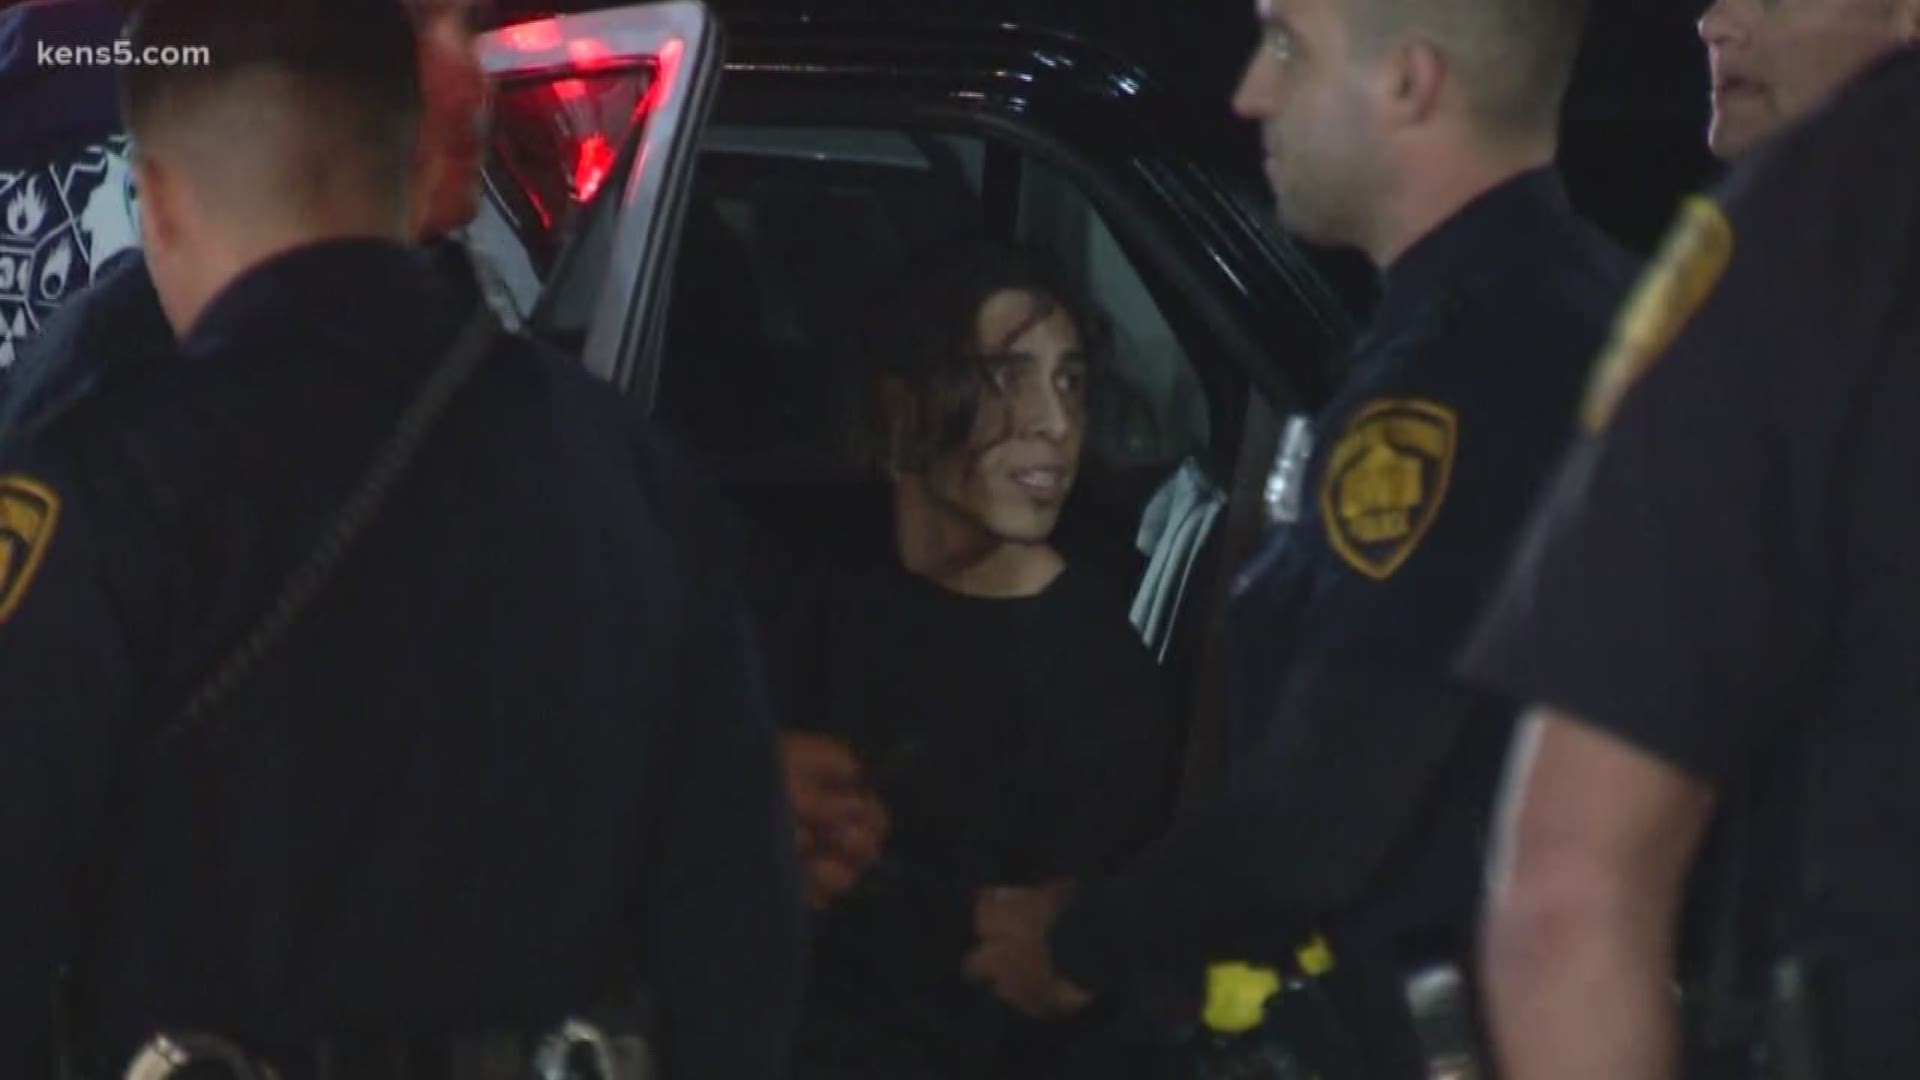 A police K-9 helped capture a man who tried to run away from officers after authorities received a call for family violence, the San Antonio Police Department said.